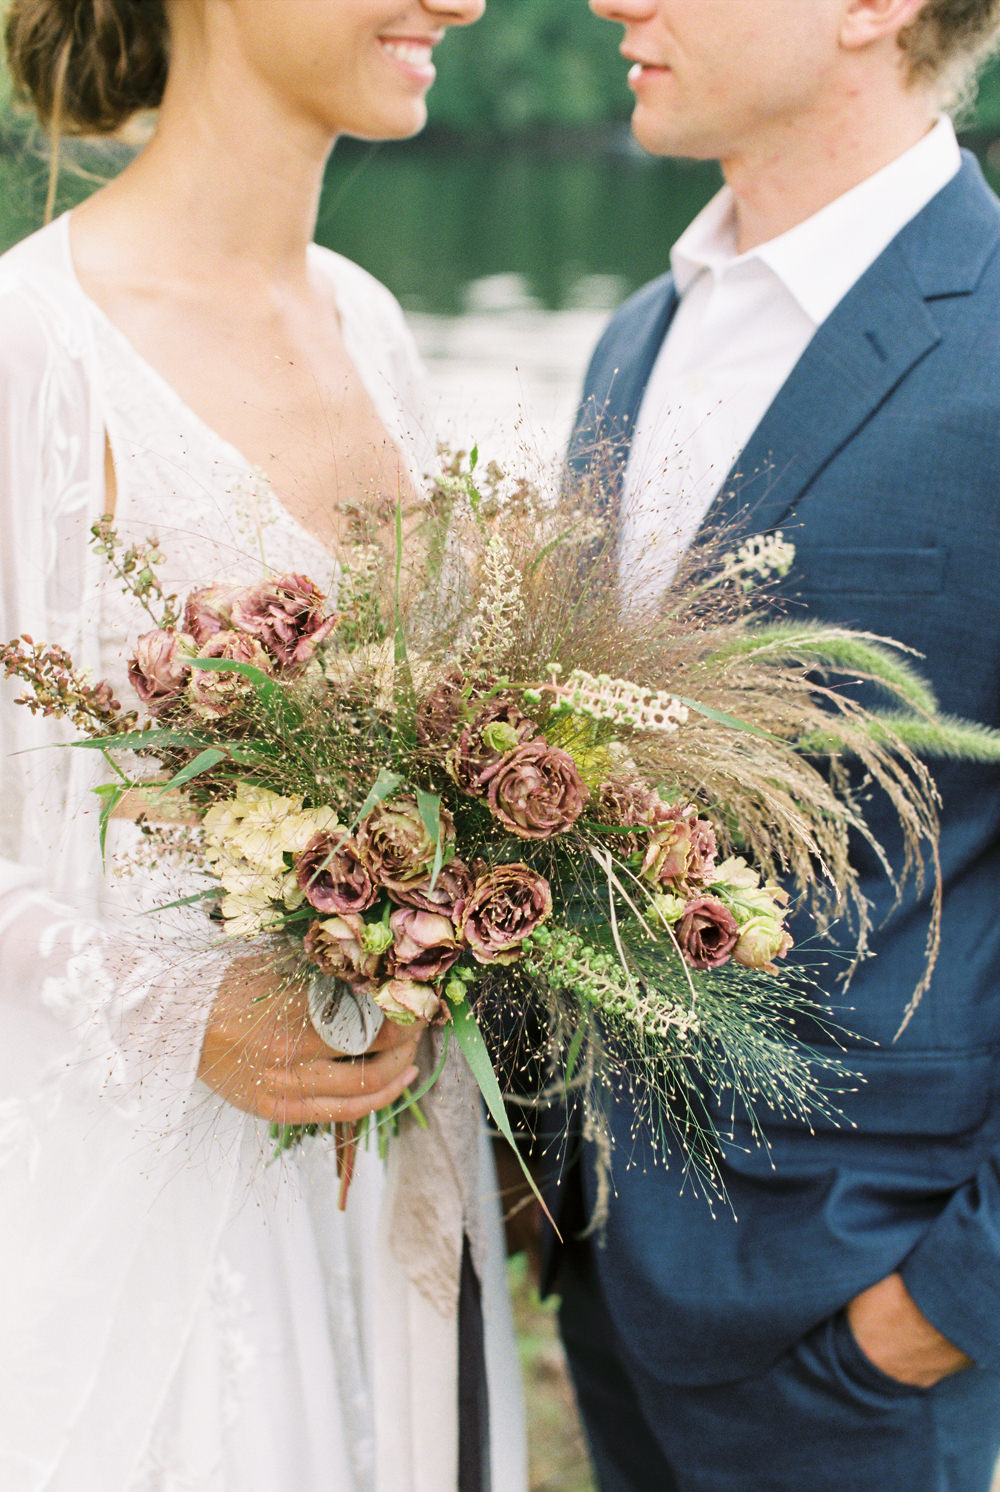 rustic modern bohemian wedding bouquet with dust mauve roses, wild grasses and foraged greens for Adirondack Island elopement by Mary Dougherty